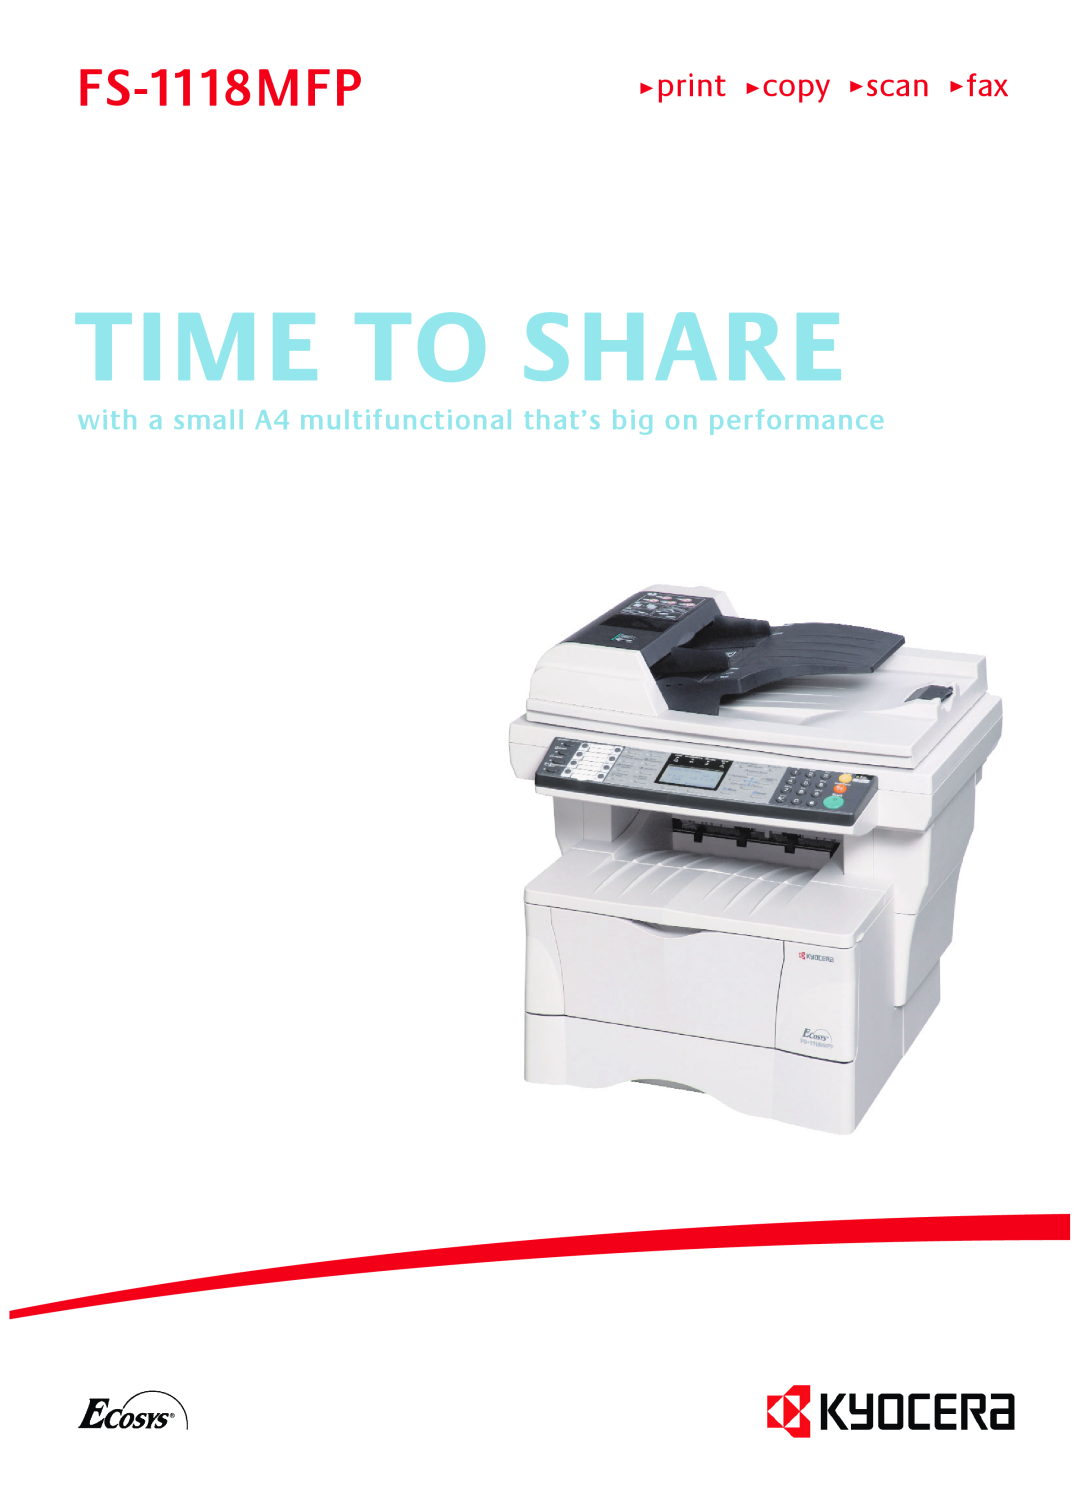 Kyocera FS-1118MFP manual Time To Share, print copy scan fax, with a small A4 multifunctional that’s big on performance 